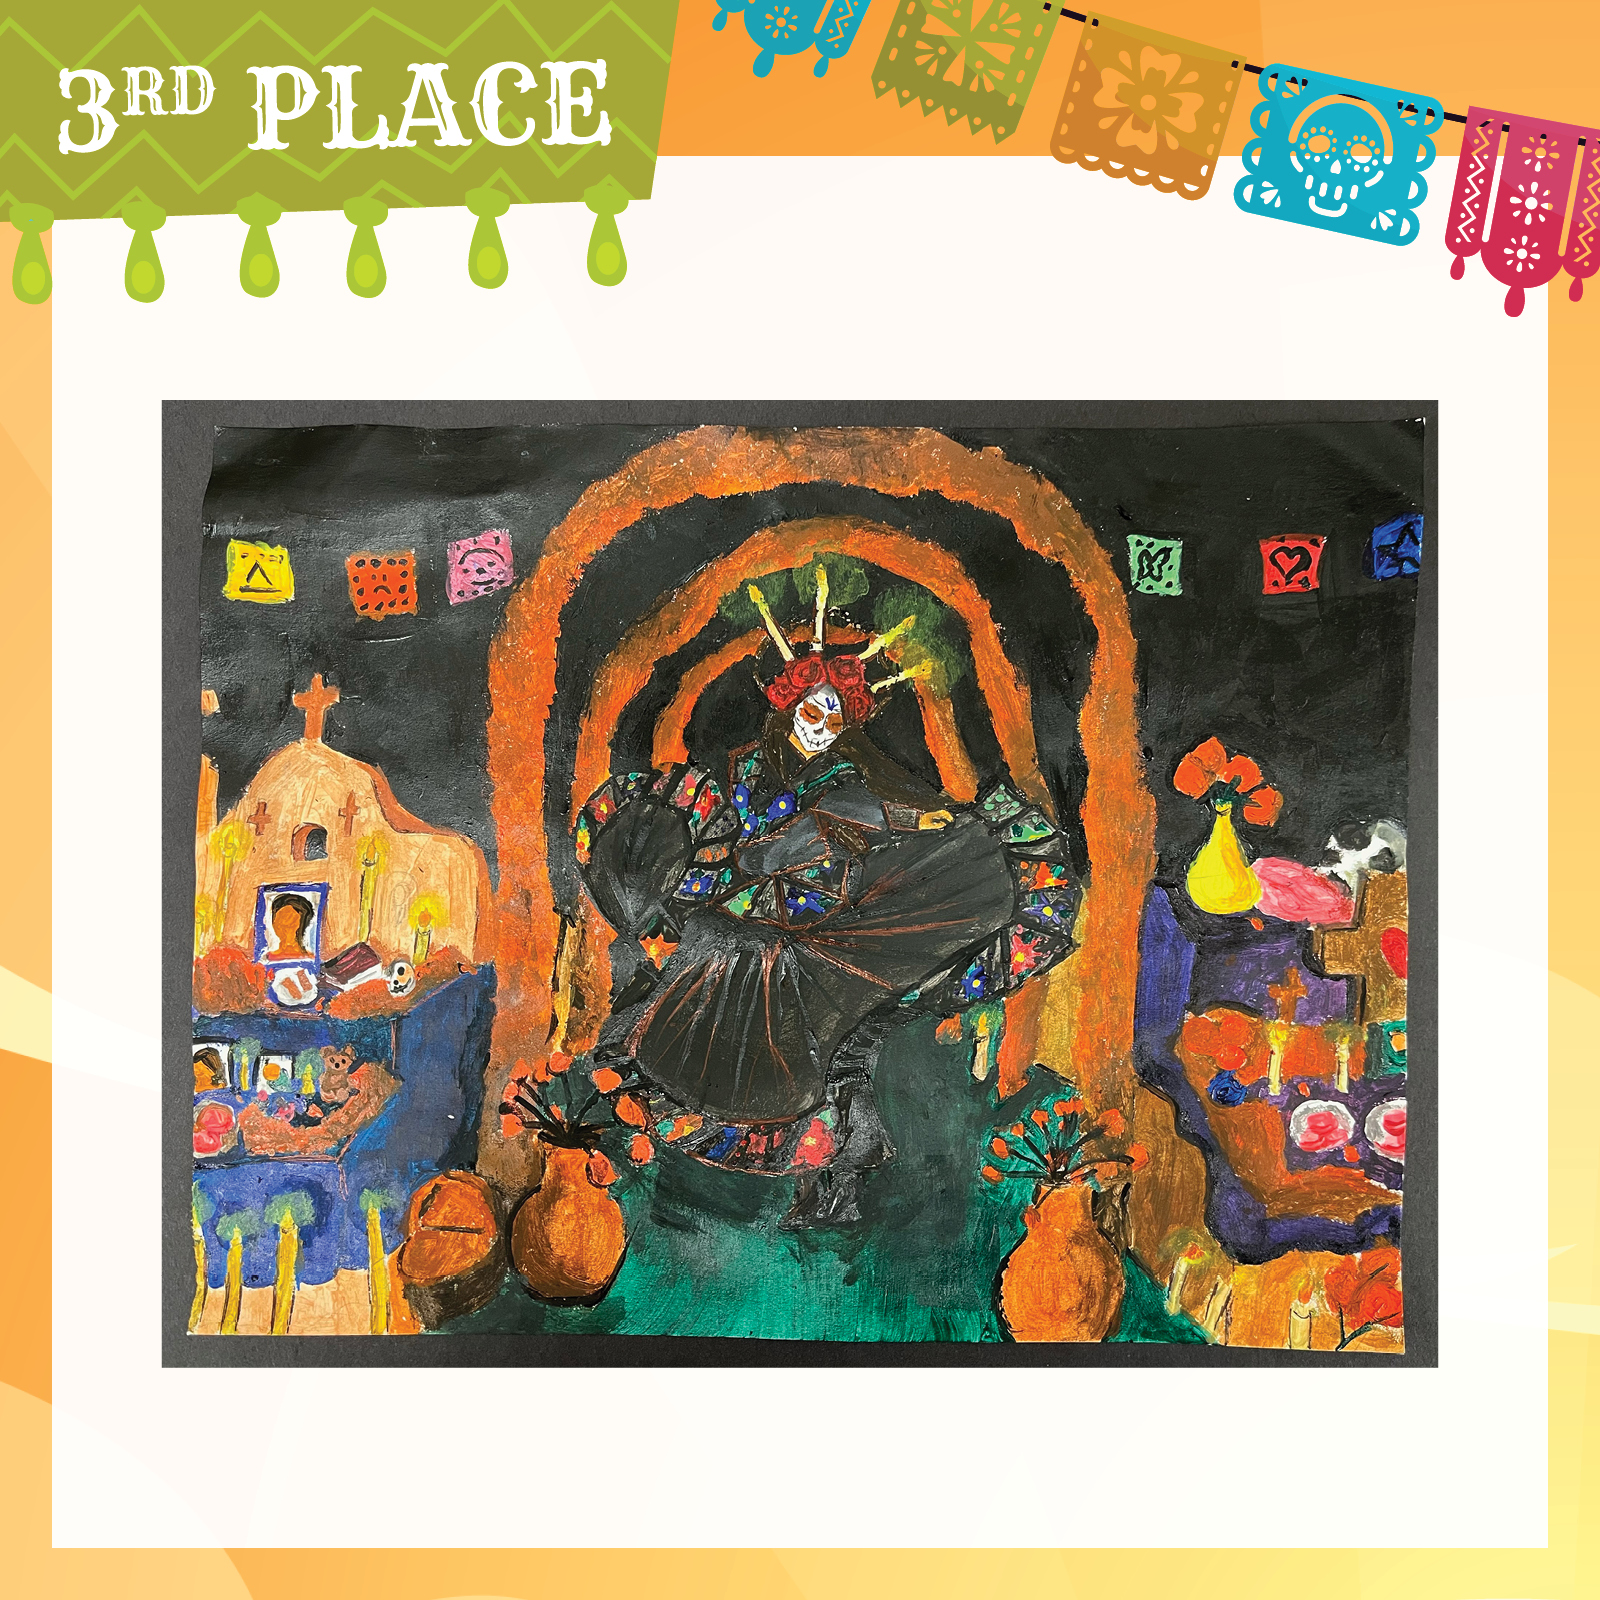 Painting of traditionally dressed female dia de los muertos figure on alter with photographs, candles, crosses and banners